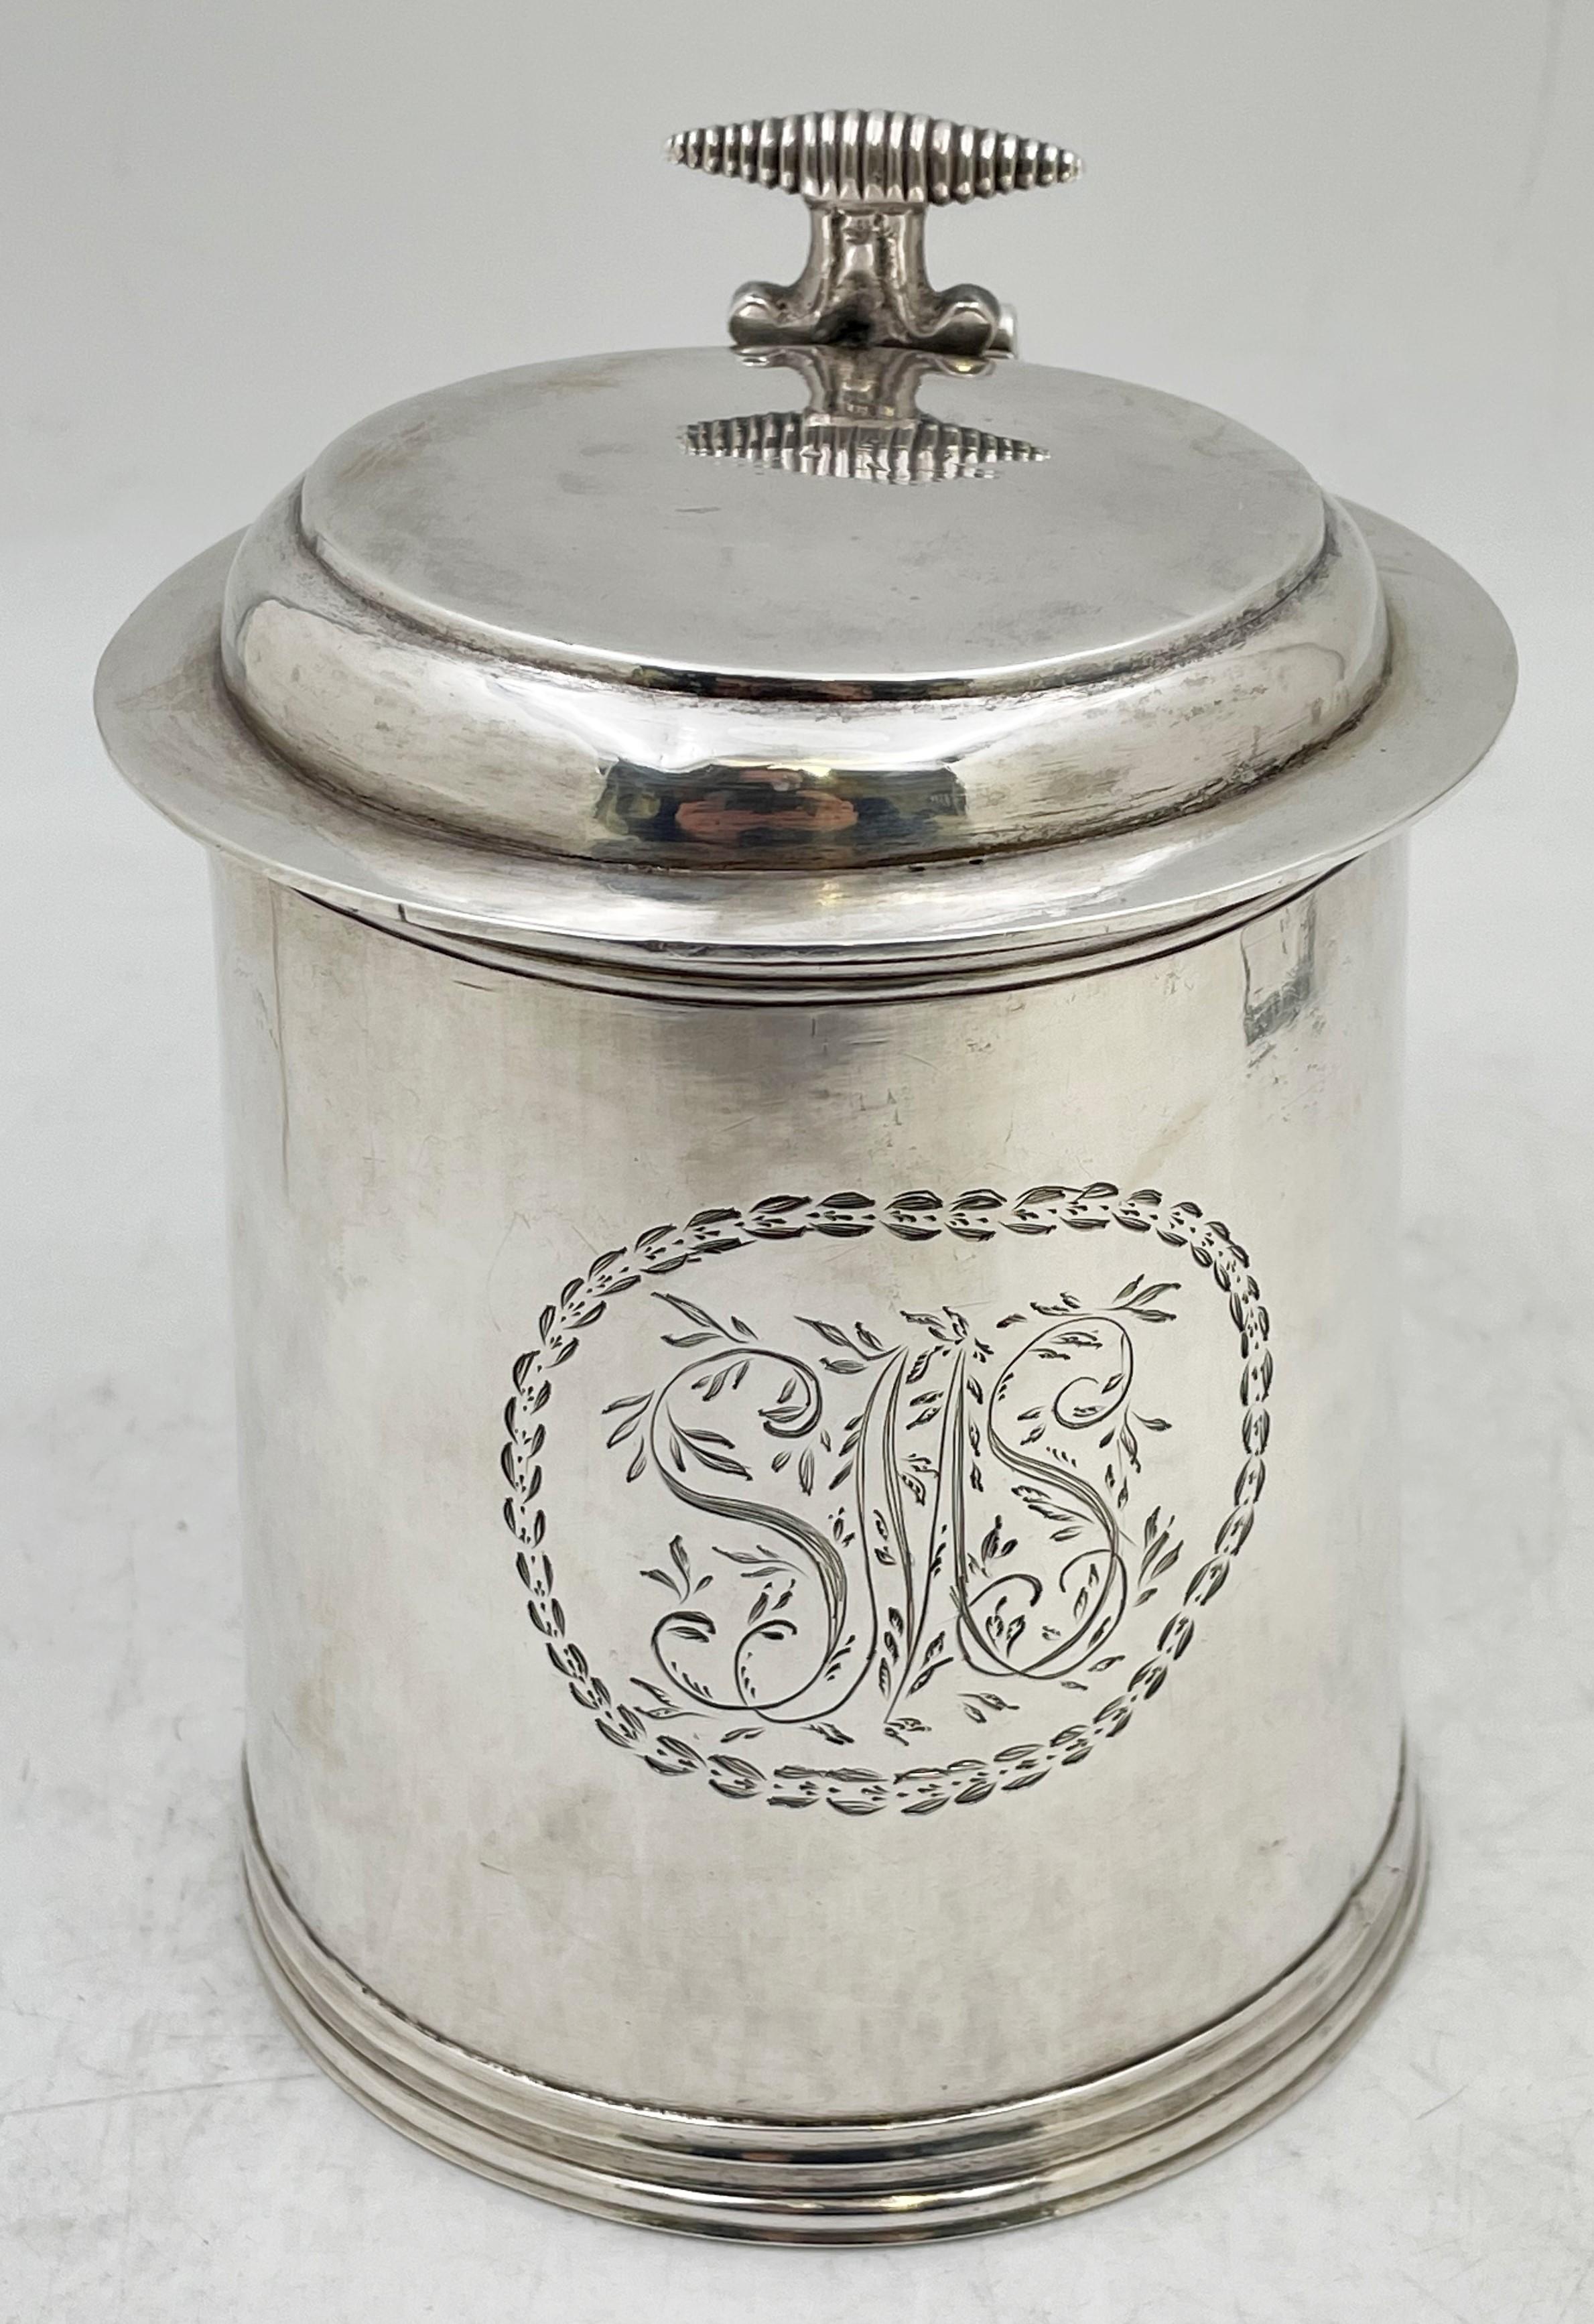 Rare early American silver tankard circa 1710, presumably from Albany, New York, with a heavy gage and with an elegant design, measuring 6 2/3’’ in height by 6 1/4’’ in depth with the handle (diameter of the tankard at the base is 4 7/8’’) and